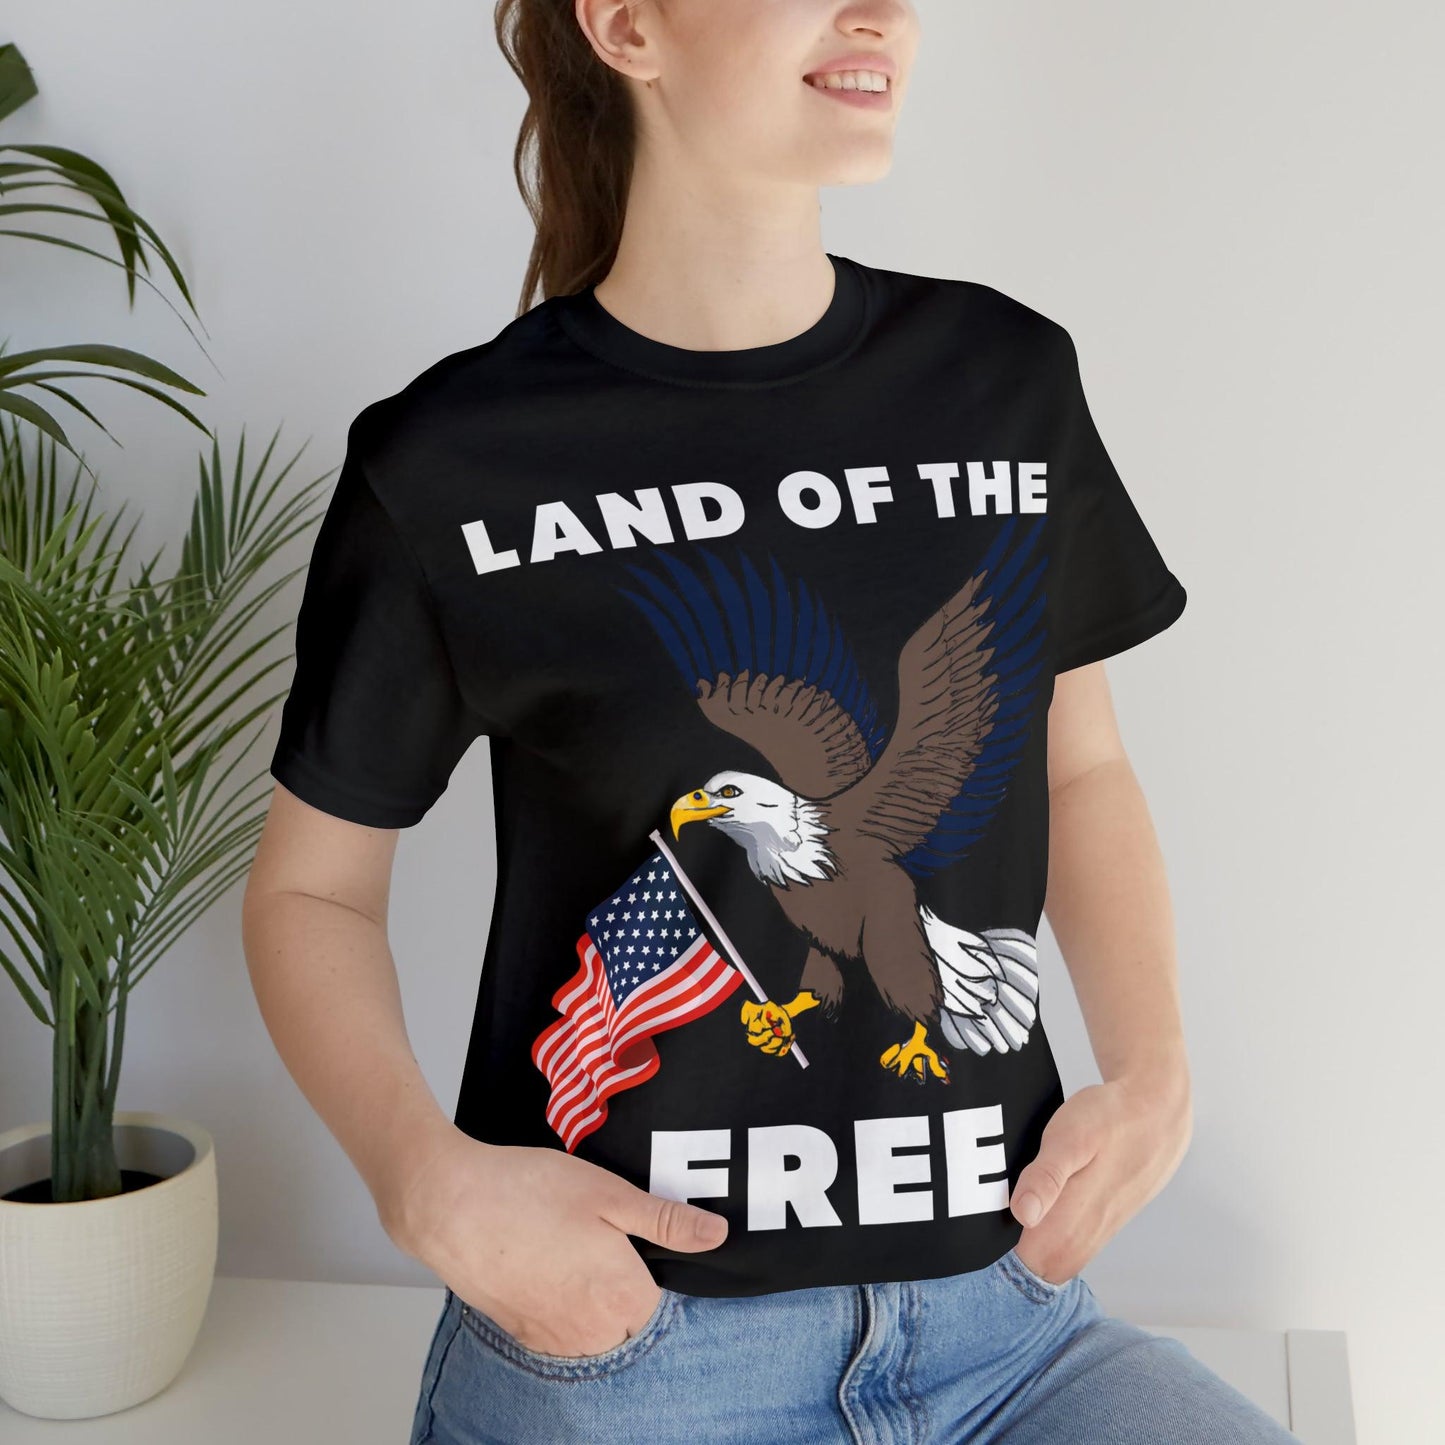 "Land of the Free, Home of the Brave: Celebrate Independence Day with Patriotic Shirts, Flag shirt - Freedom, Fireworks, and More - Giftsmojo